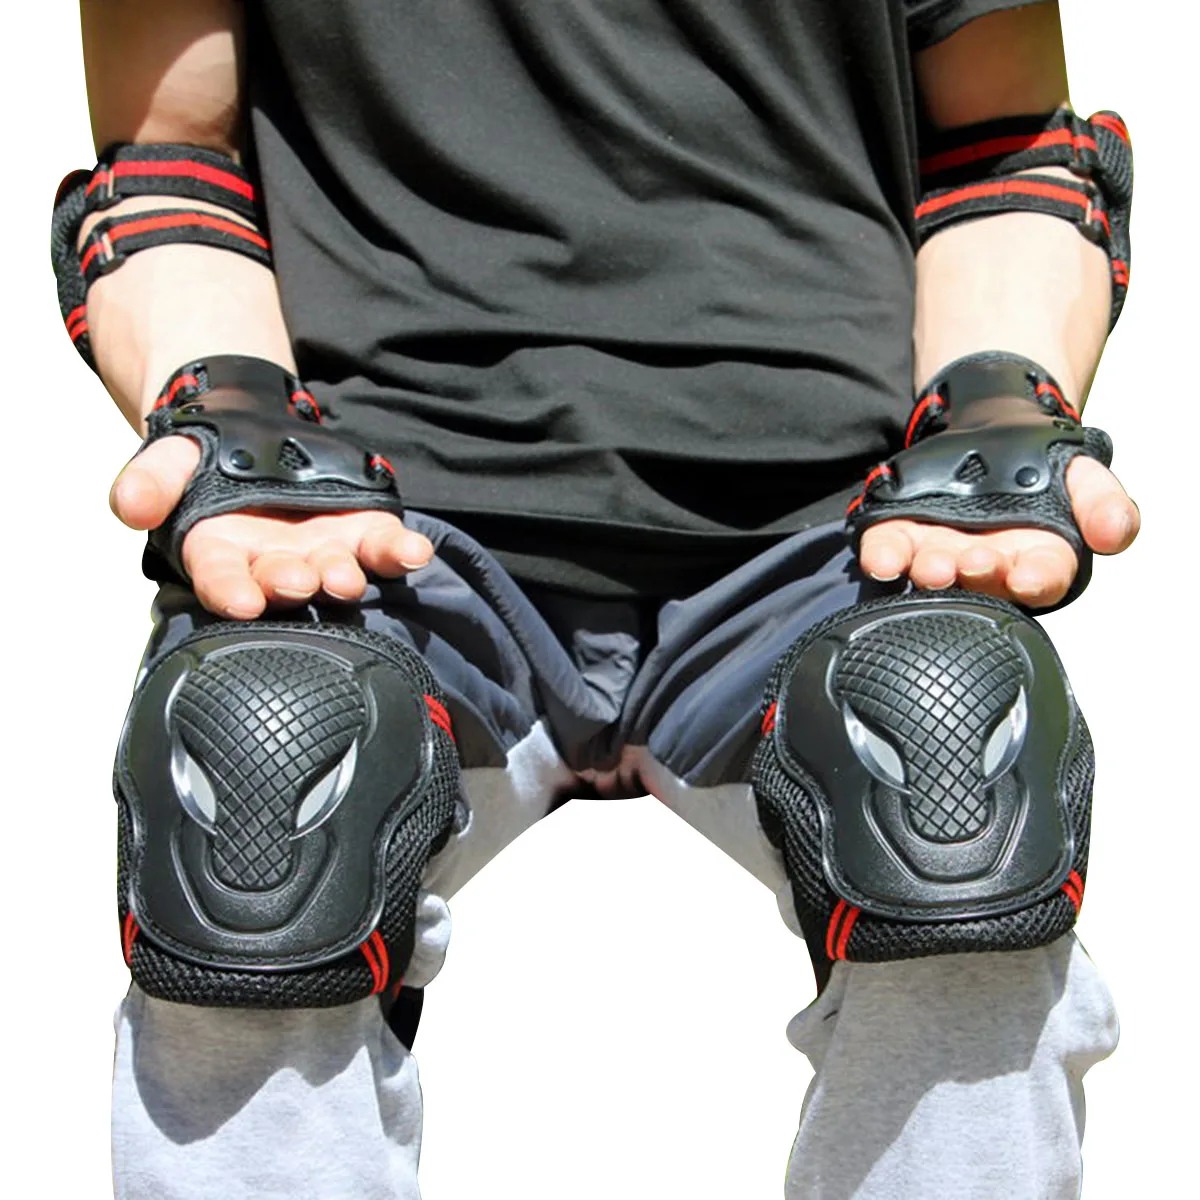 RMISODO 6 Pieces Kids Protective Gear Set Knee Pad Elbow Pad Guard with Wrist Guard for Skating Cycling Scooter Riding Sport